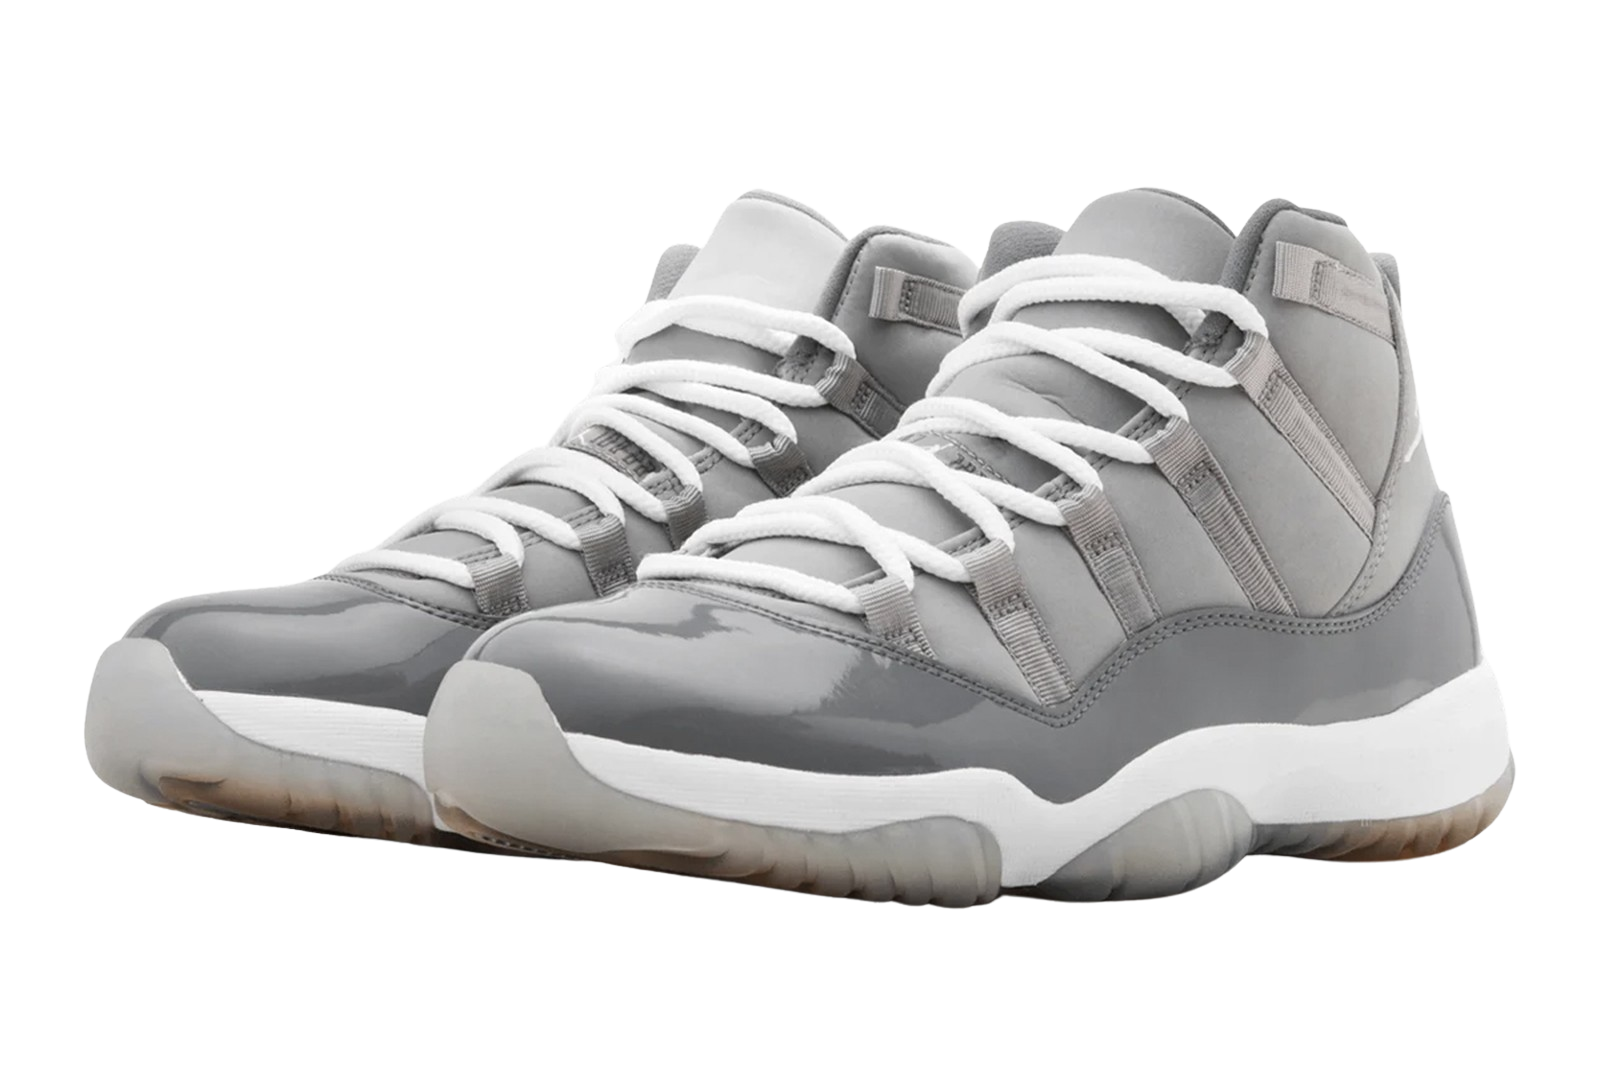 Air Jordan 11 Cool Grey Sneaker Match T-Shirts, Hoodies, and Outfits